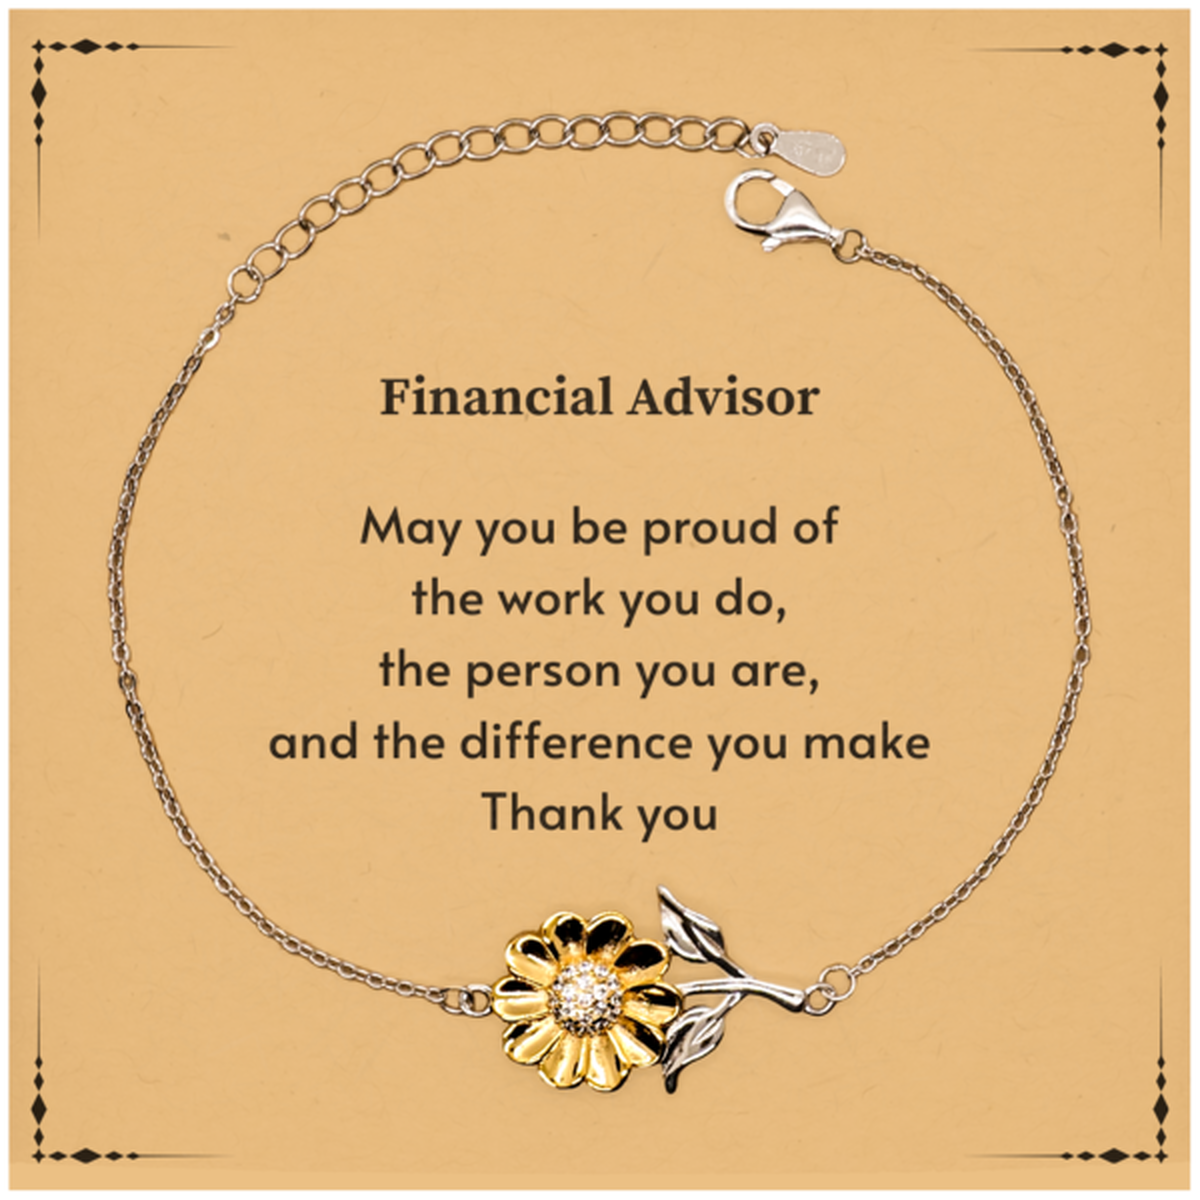 Heartwarming Sunflower Bracelet Retirement Coworkers Gifts for Financial Advisor, Financial Advisor May You be proud of the work you do, the person you are Gifts for Boss Men Women Friends